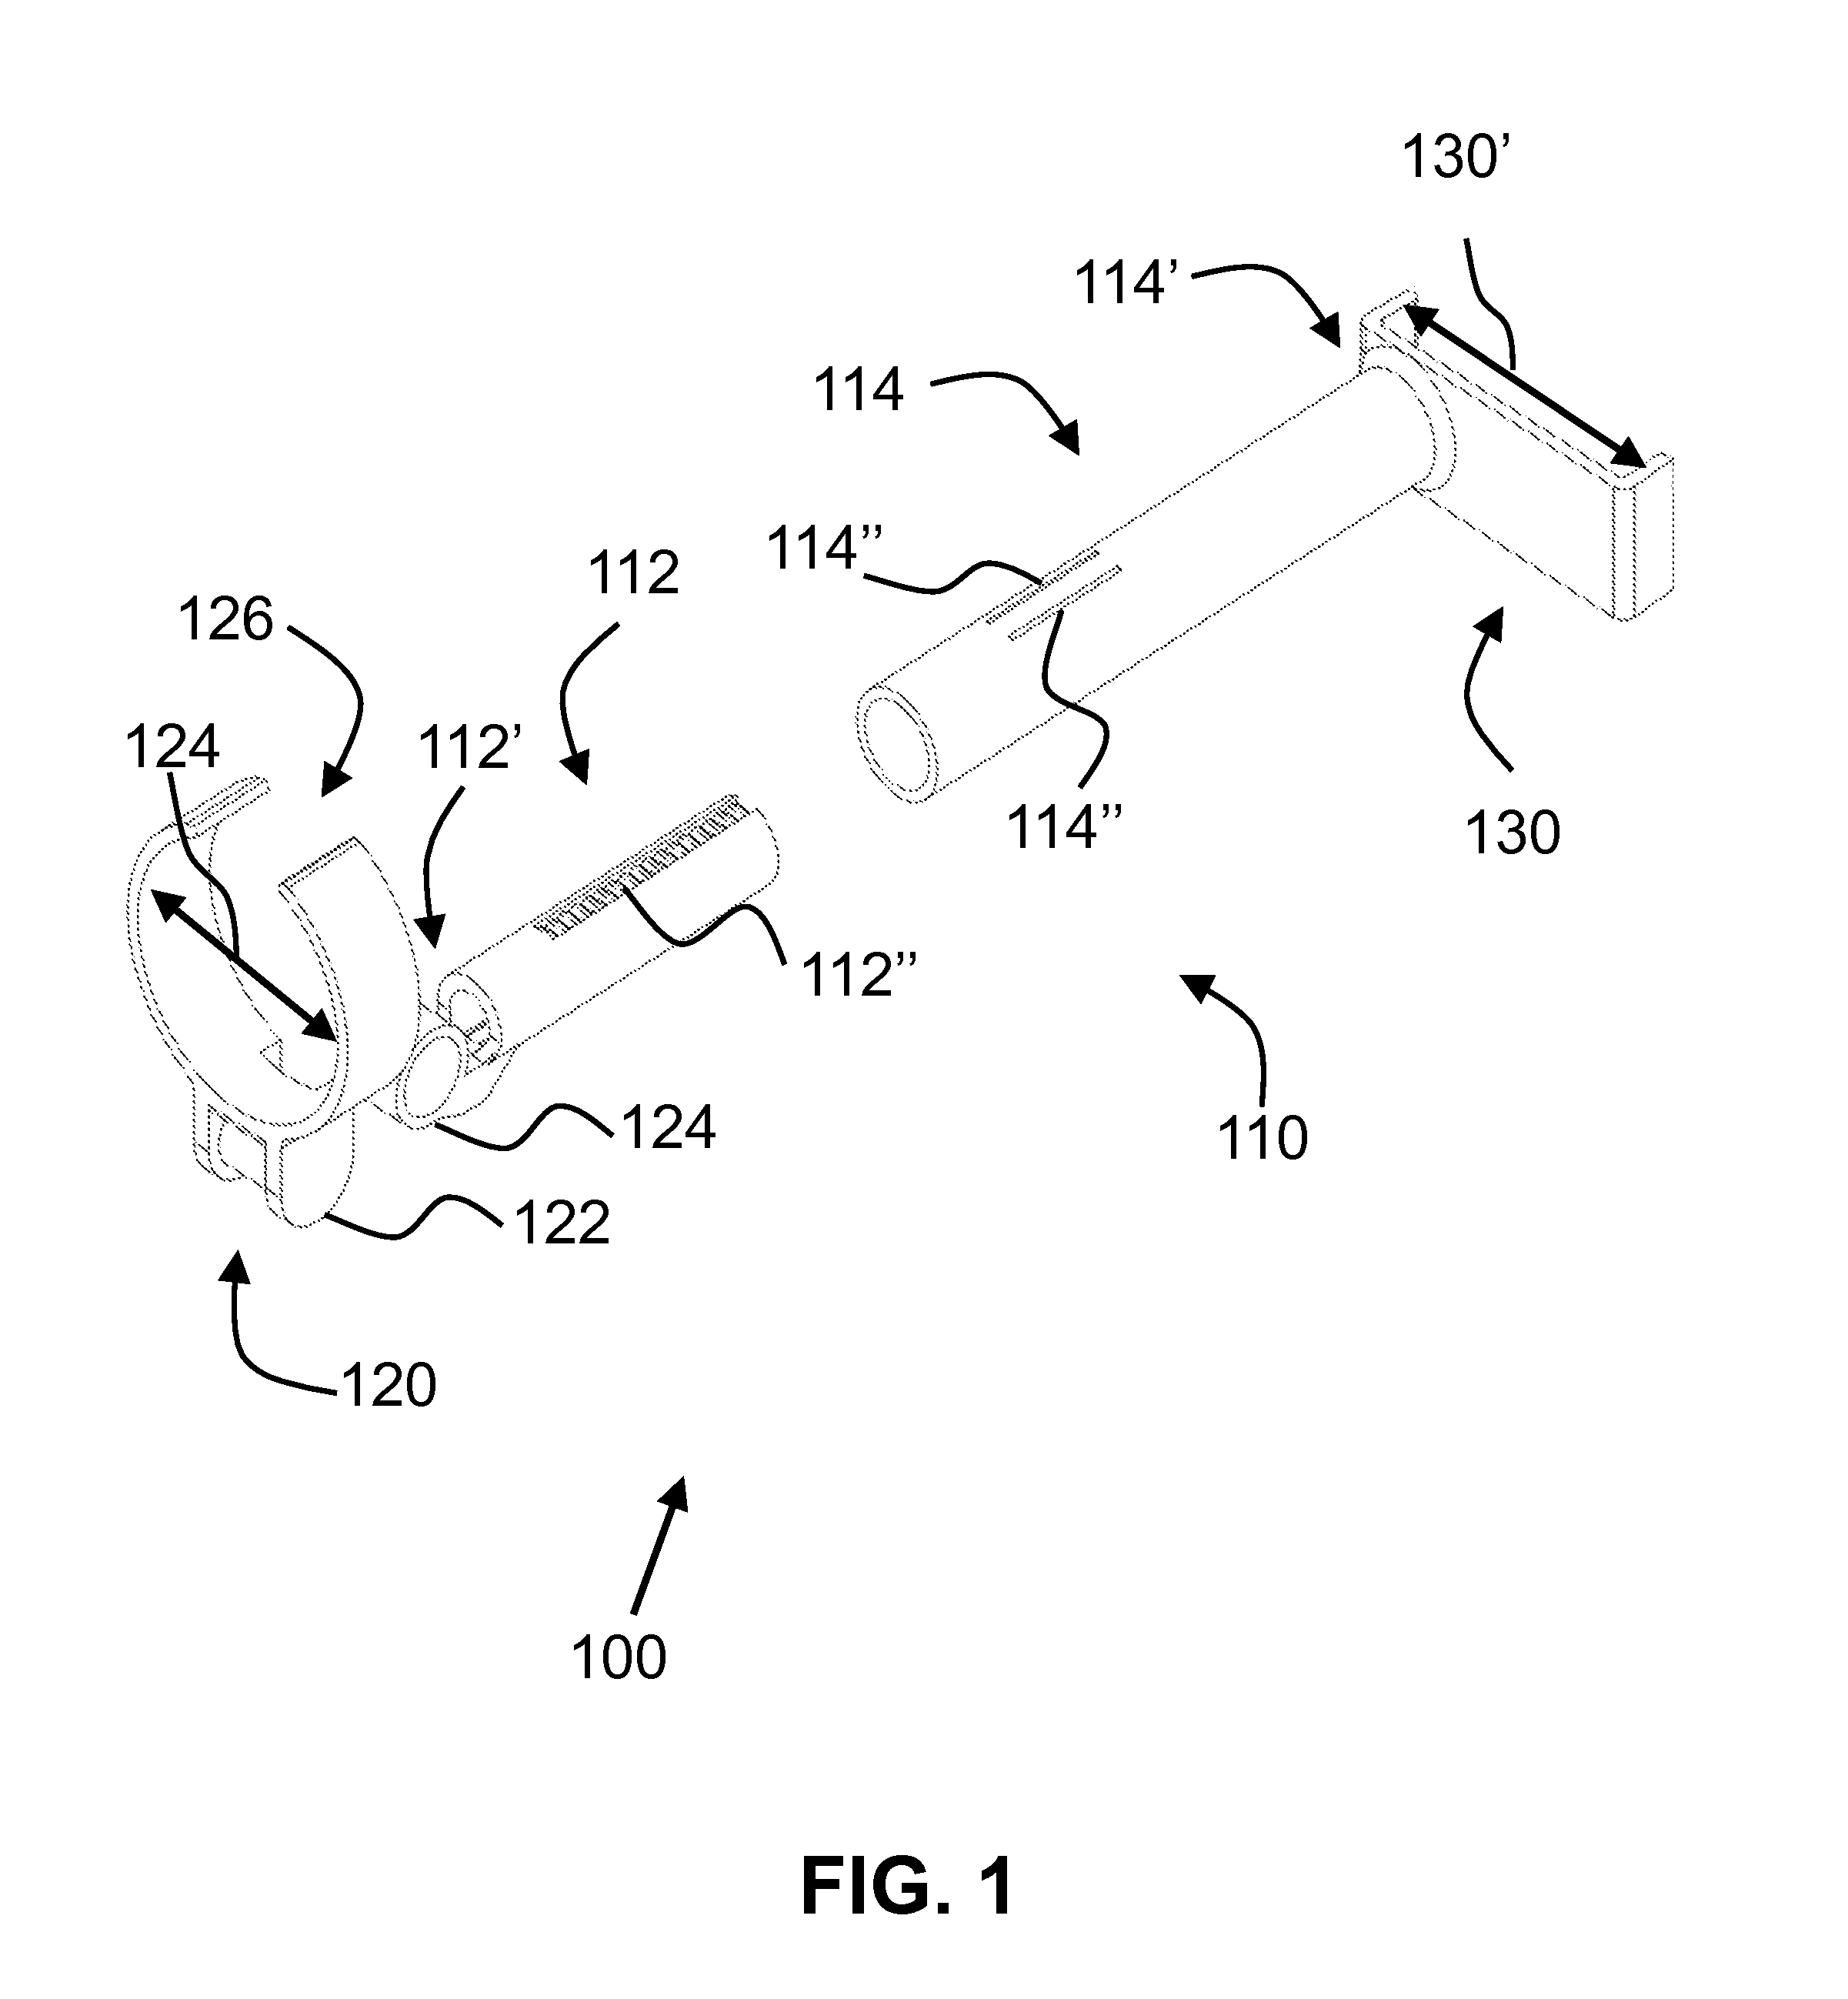 Modular lens adapters for mobile anterior and posterior segment ophthalmoscopy